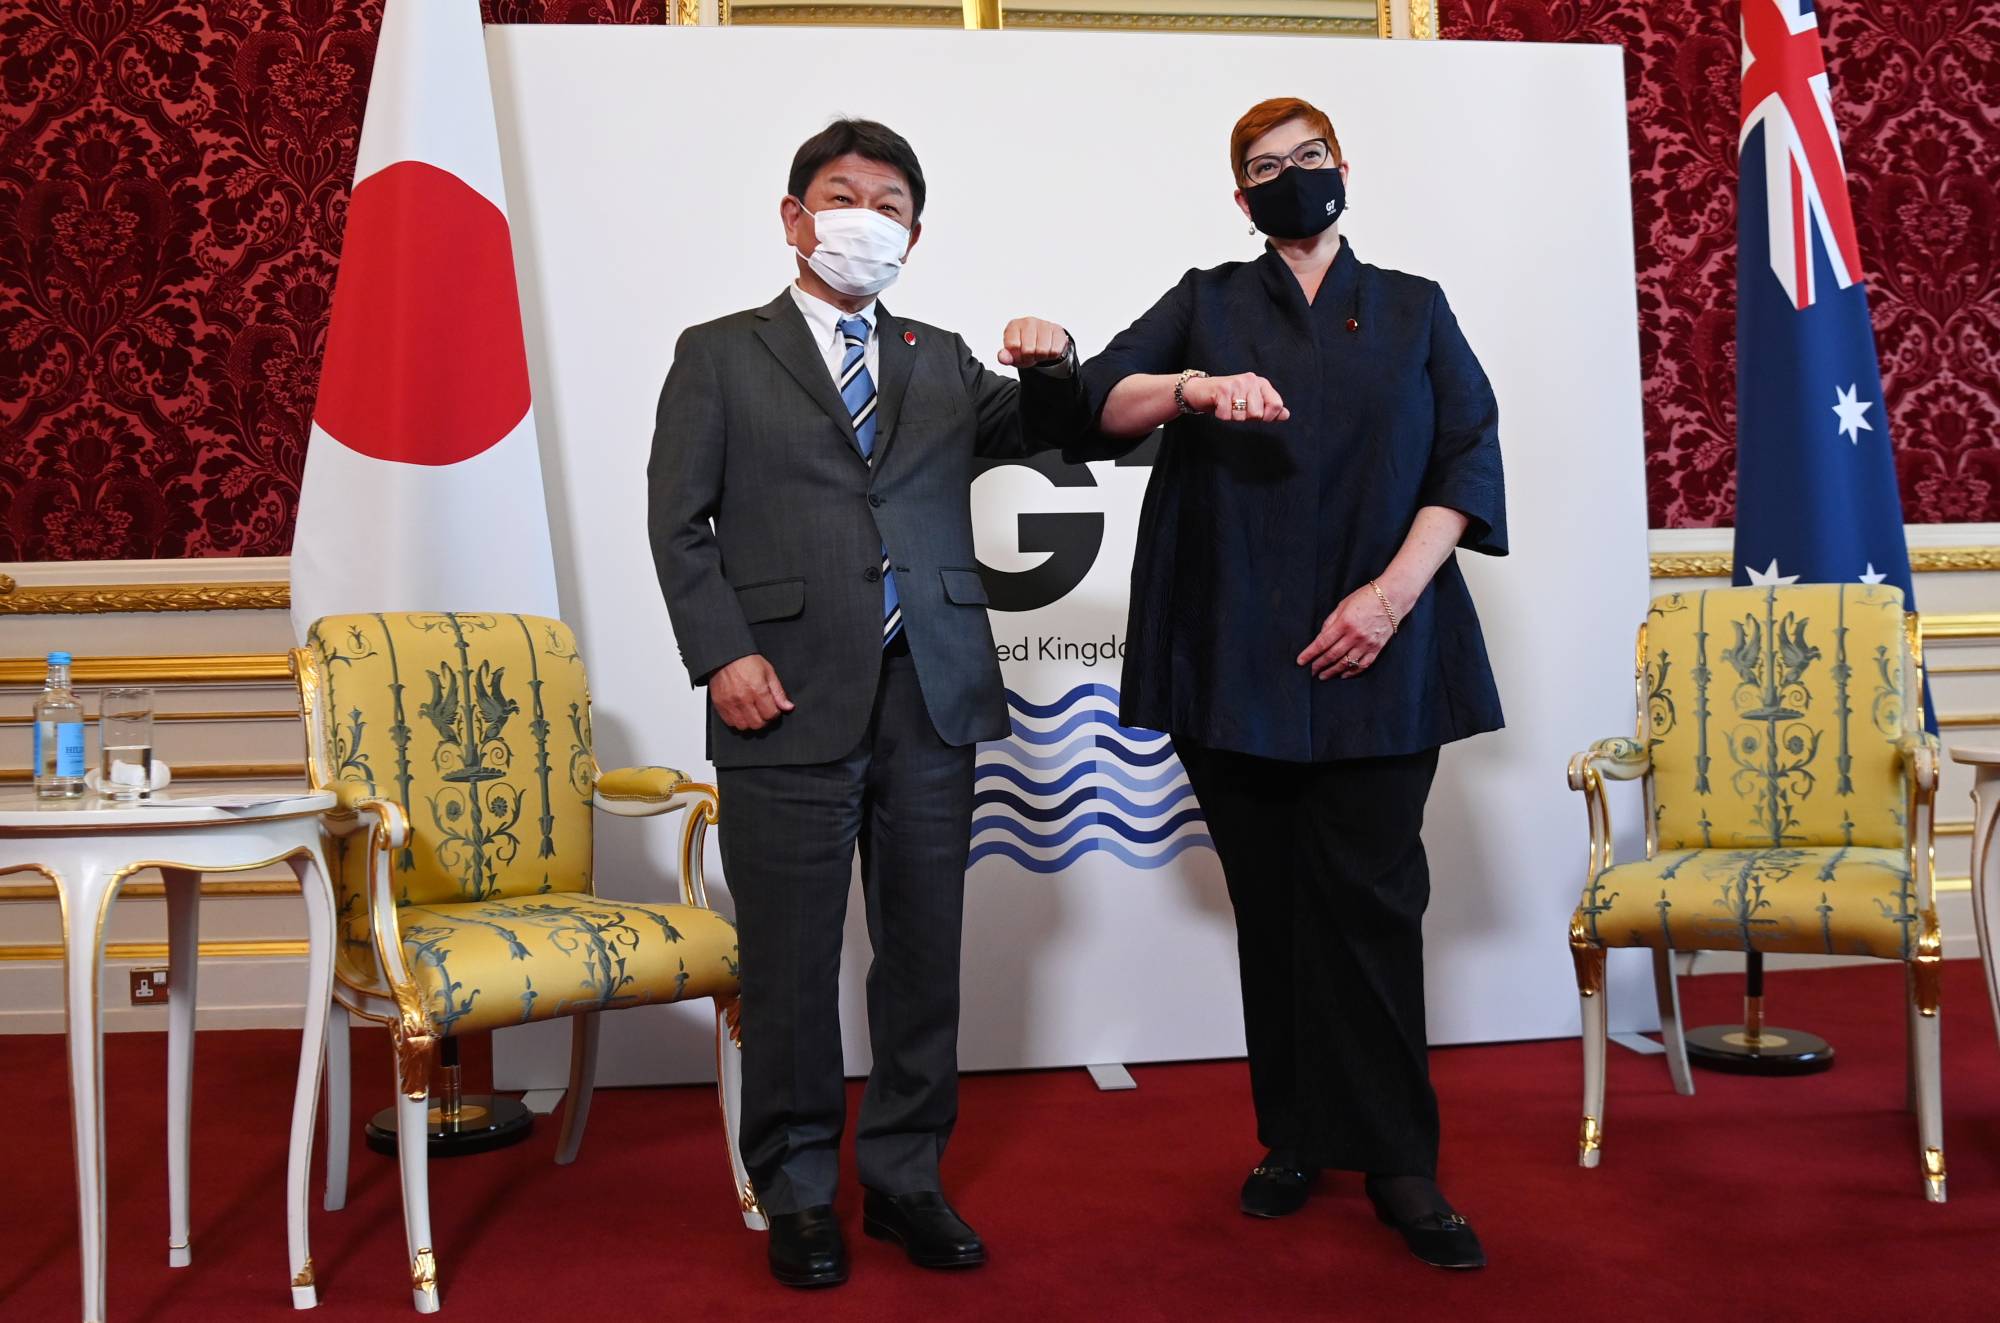 Foreign Minisgter Toshimitsu Motegi and his Australian counterpart Marise Payne meet in London on Wednesday. | POOL / VIA BLOOMBERG